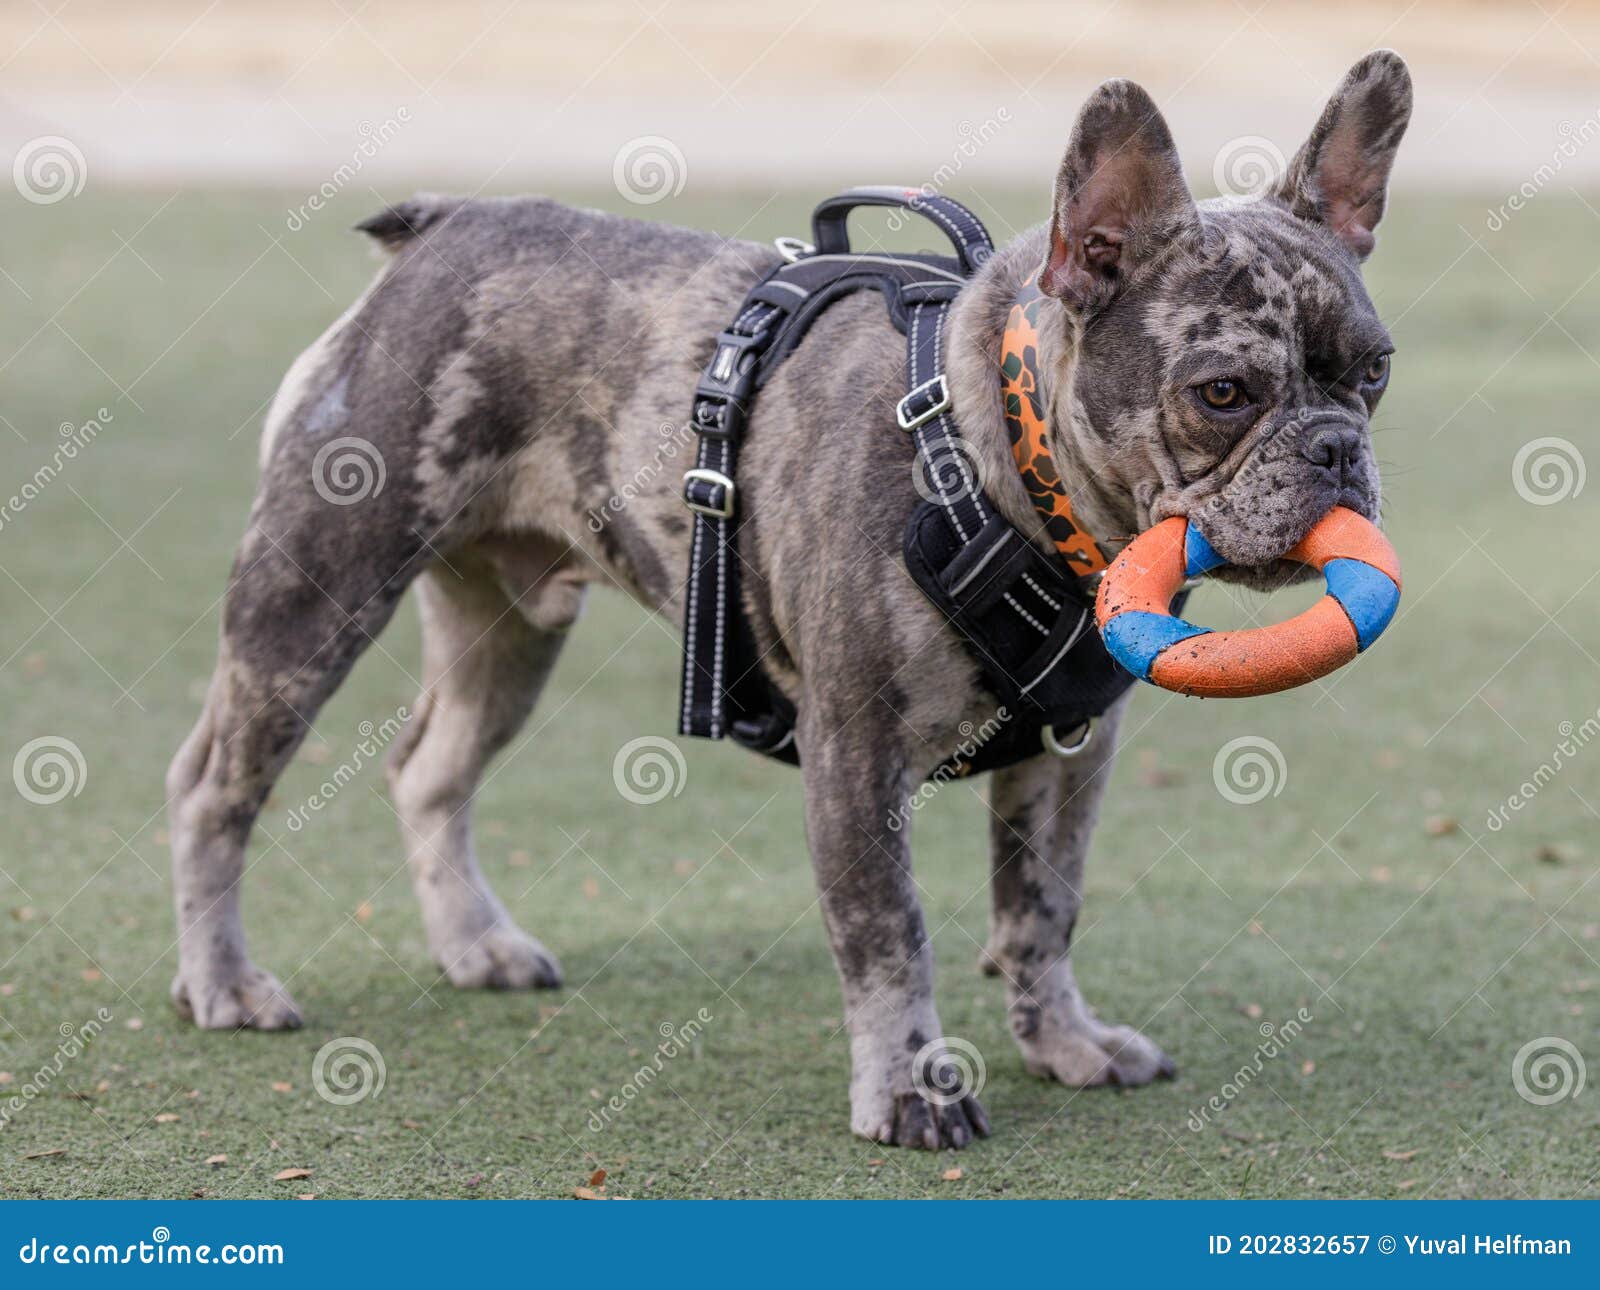 7-month-old blue merle male puppy french bulldog fetching ring toy